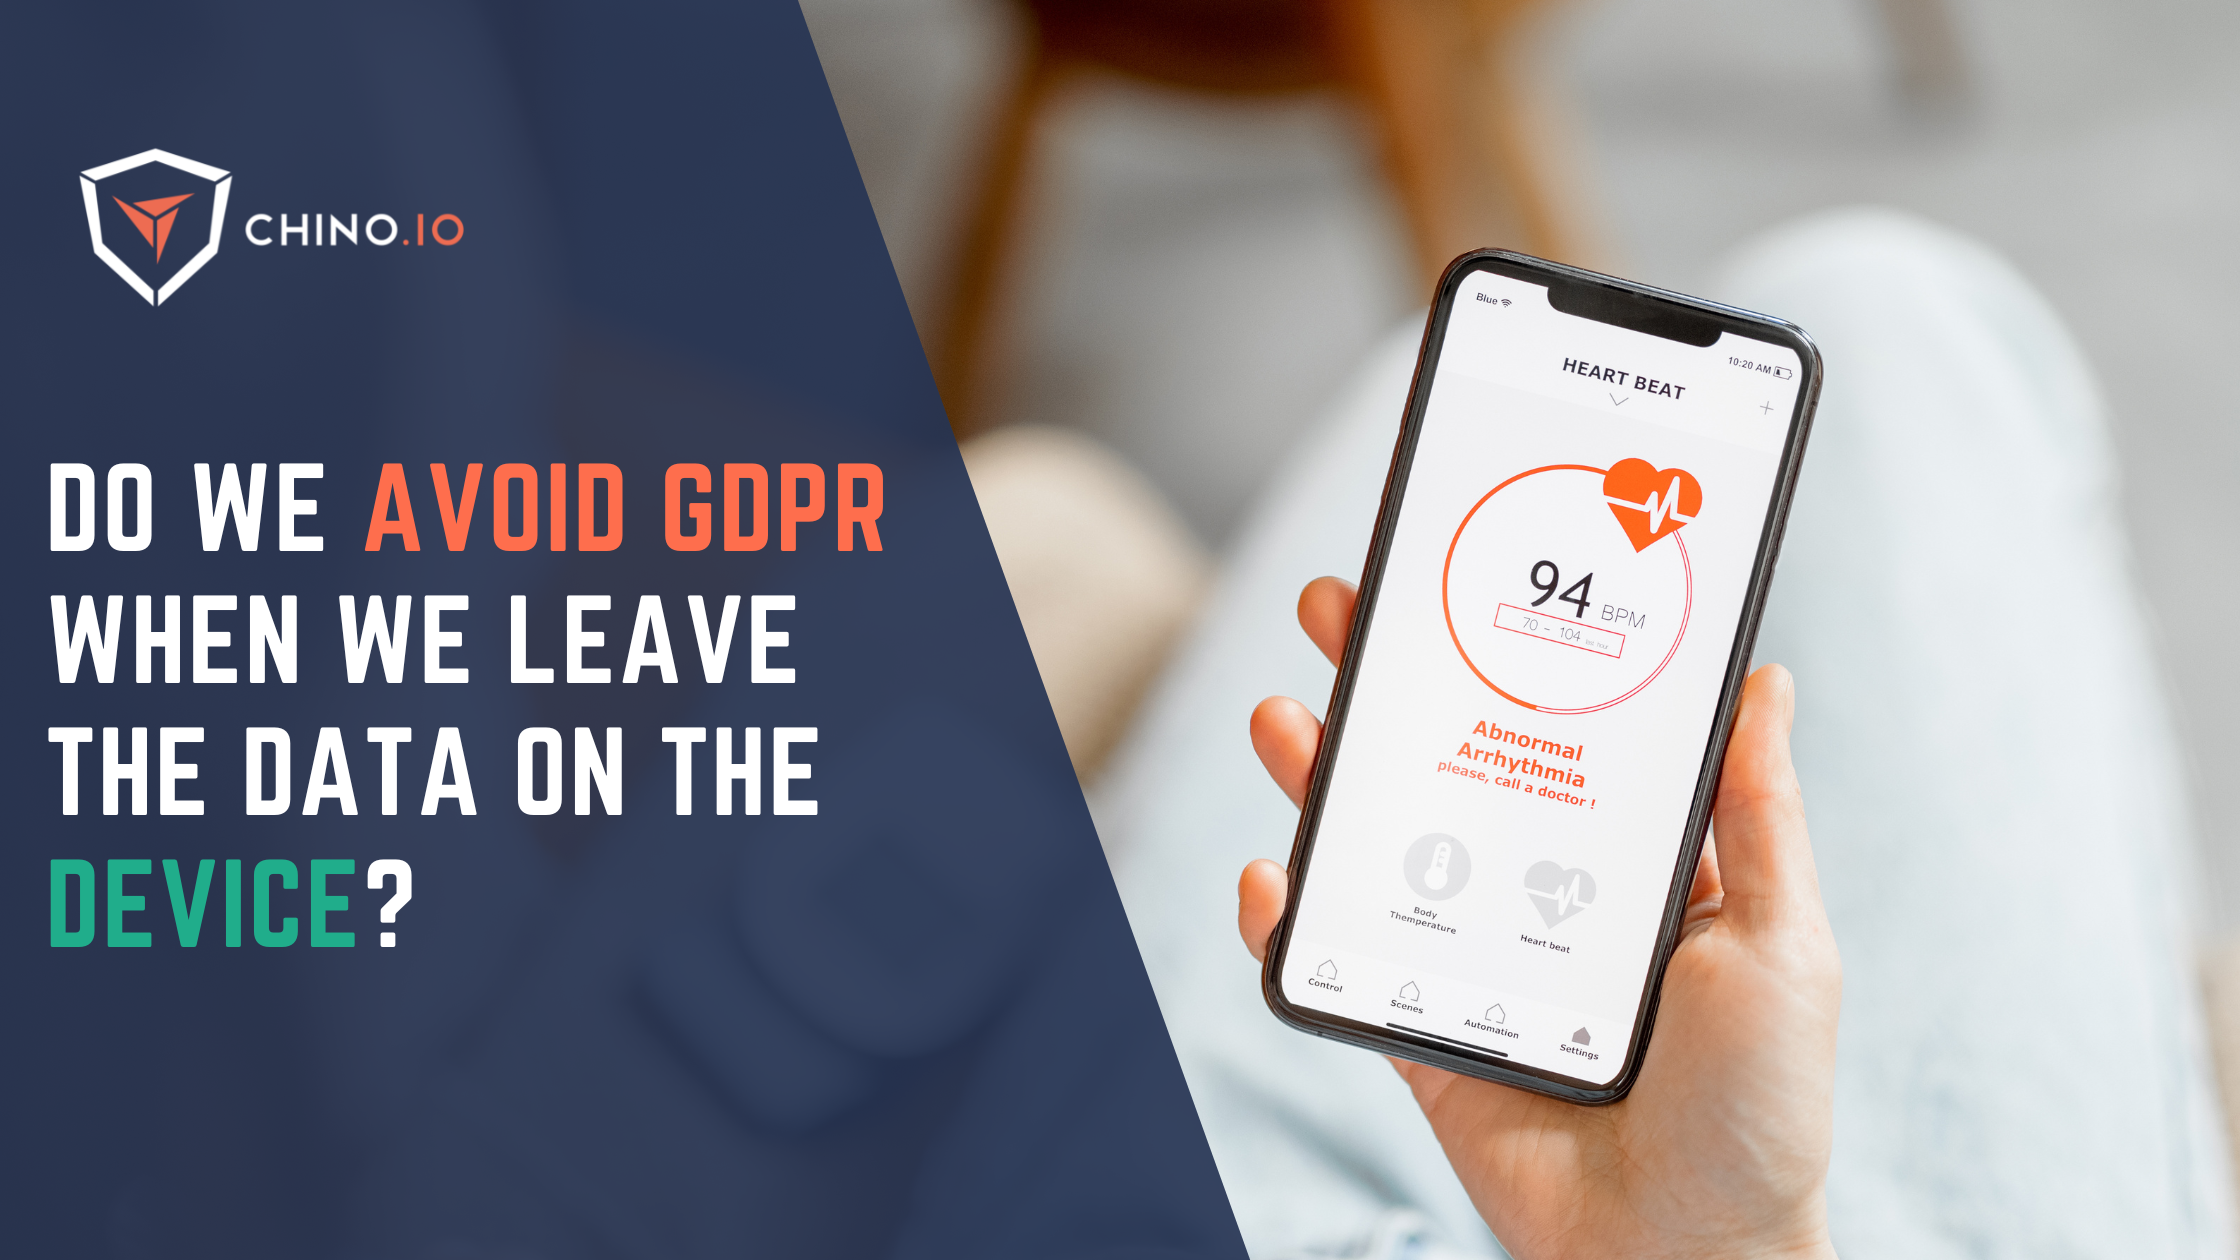 Do we avoid GDPR when we leave the data on the device?